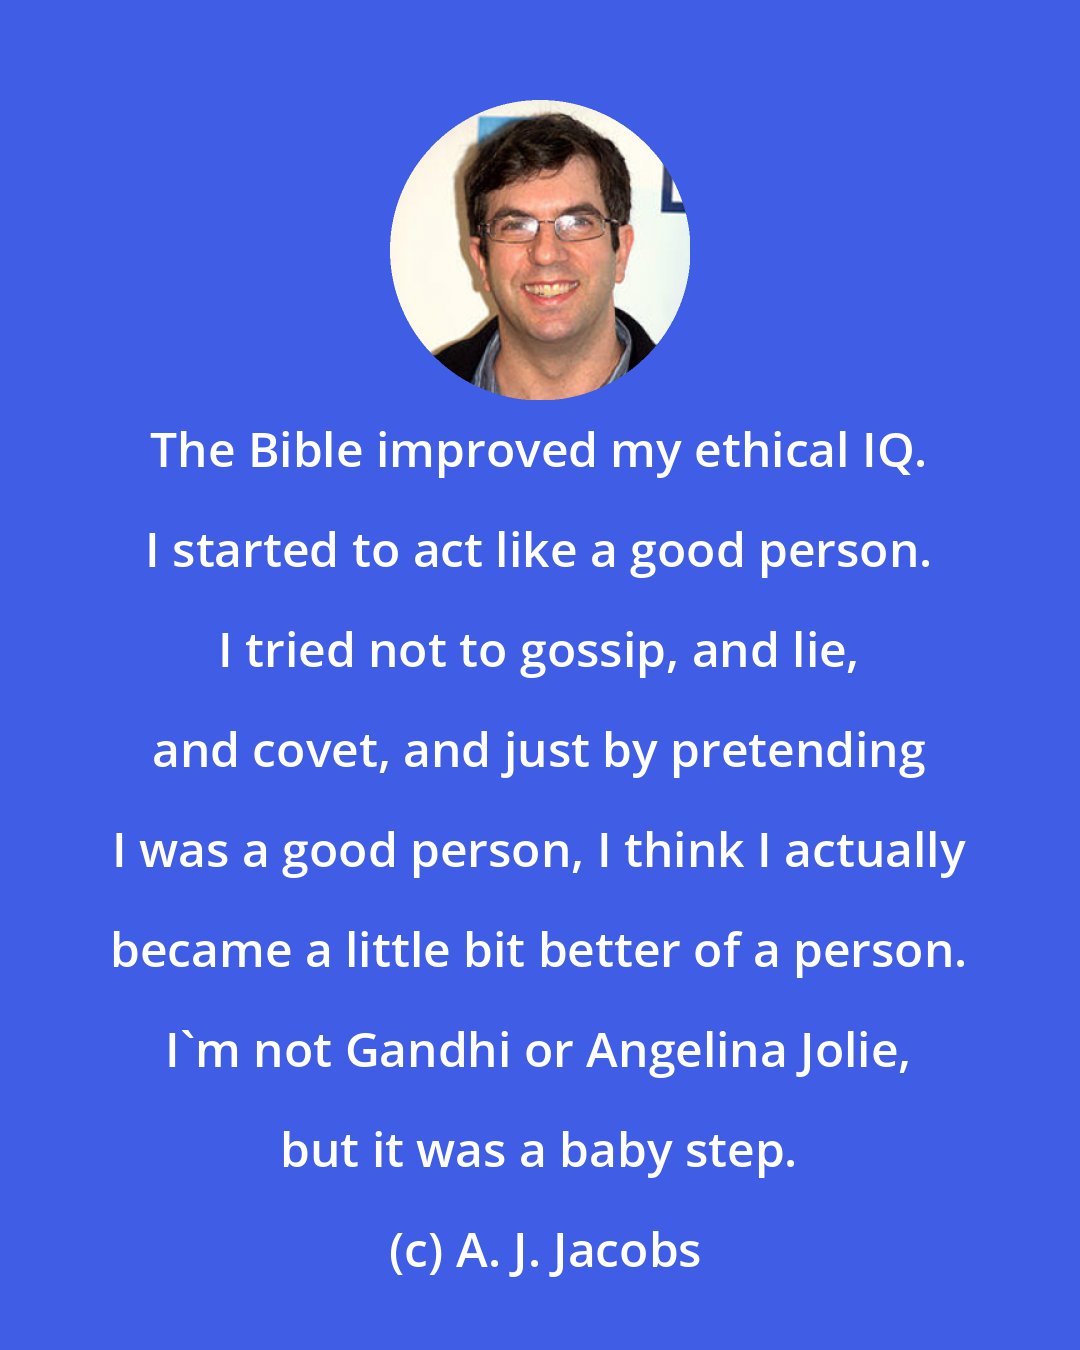 A. J. Jacobs: The Bible improved my ethical IQ. I started to act like a good person. I tried not to gossip, and lie, and covet, and just by pretending I was a good person, I think I actually became a little bit better of a person. I'm not Gandhi or Angelina Jolie, but it was a baby step.